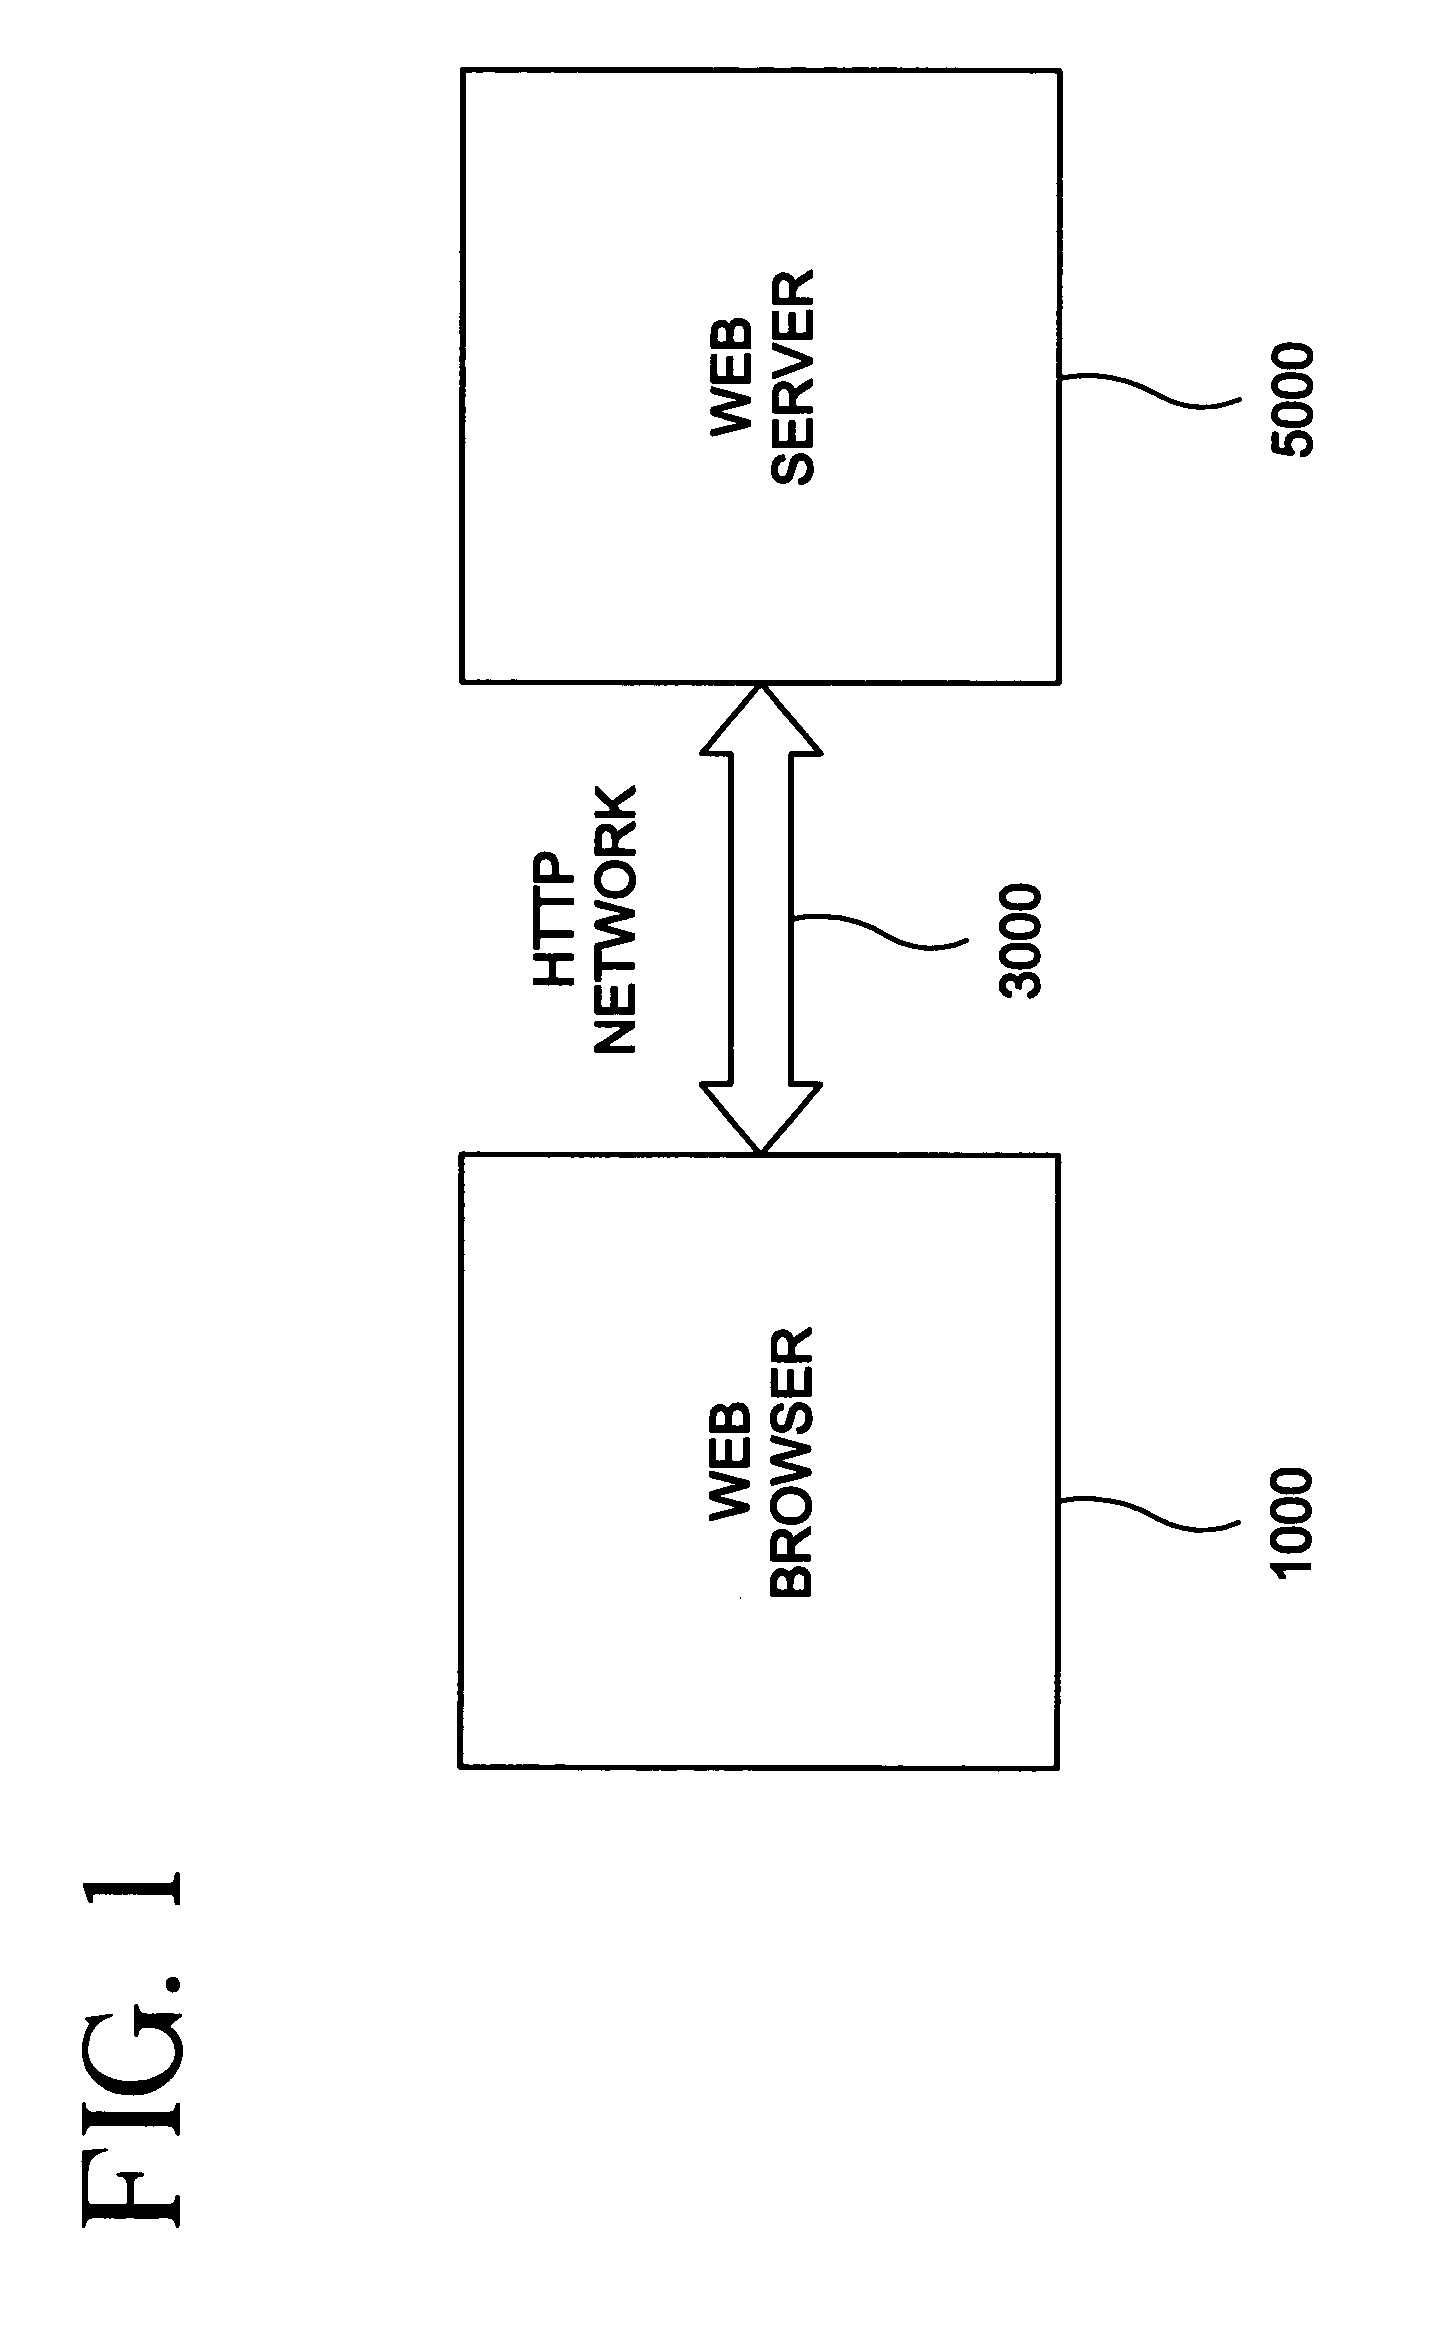 Methods and apparatus for reducing the number of server interactions in network-based applications using a dual-MVC approach